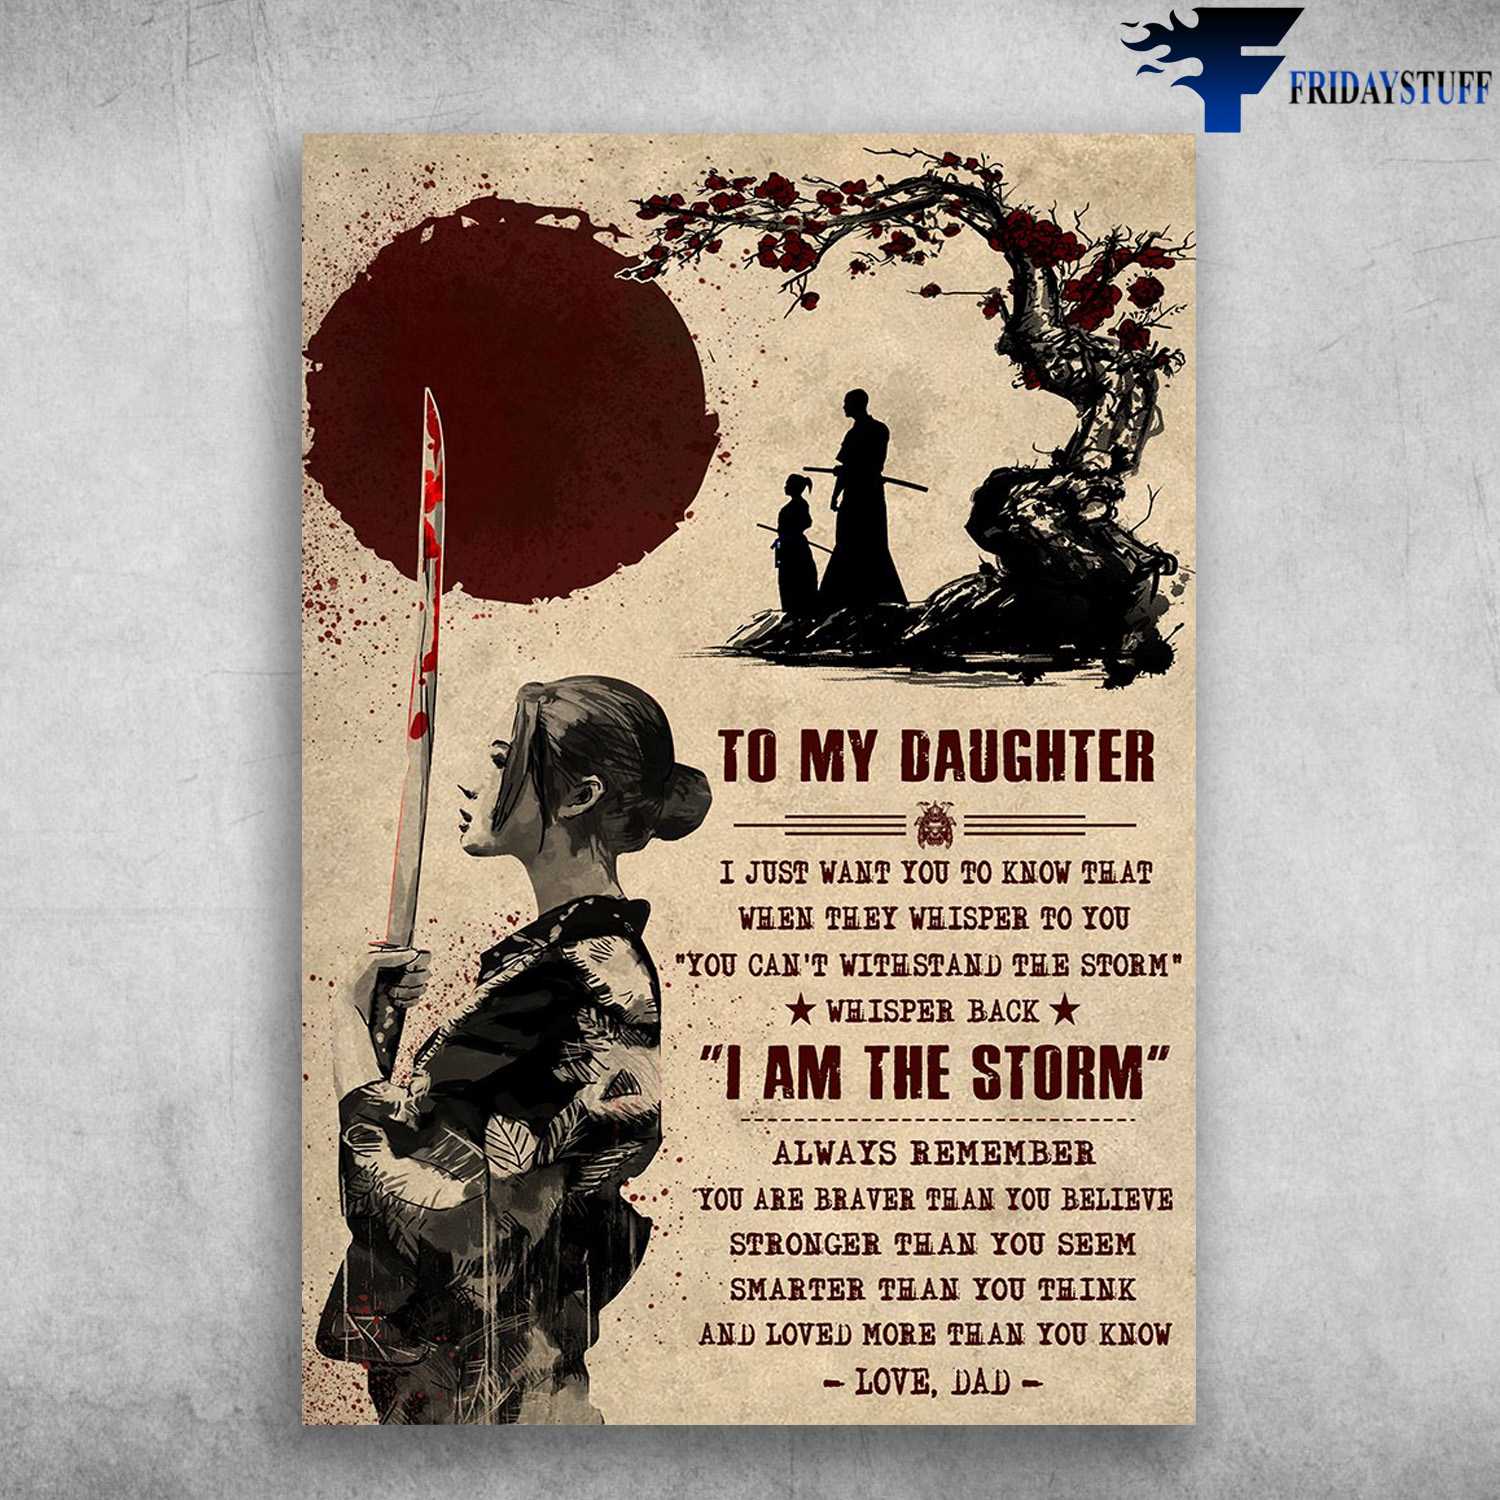 Dad And Daughter Samurai - To My Daughter, I Just Want To Know That, When They Whisper To You, You Can't Withstand The Storm, Whisper Back, I Am The Storm, Love Dad